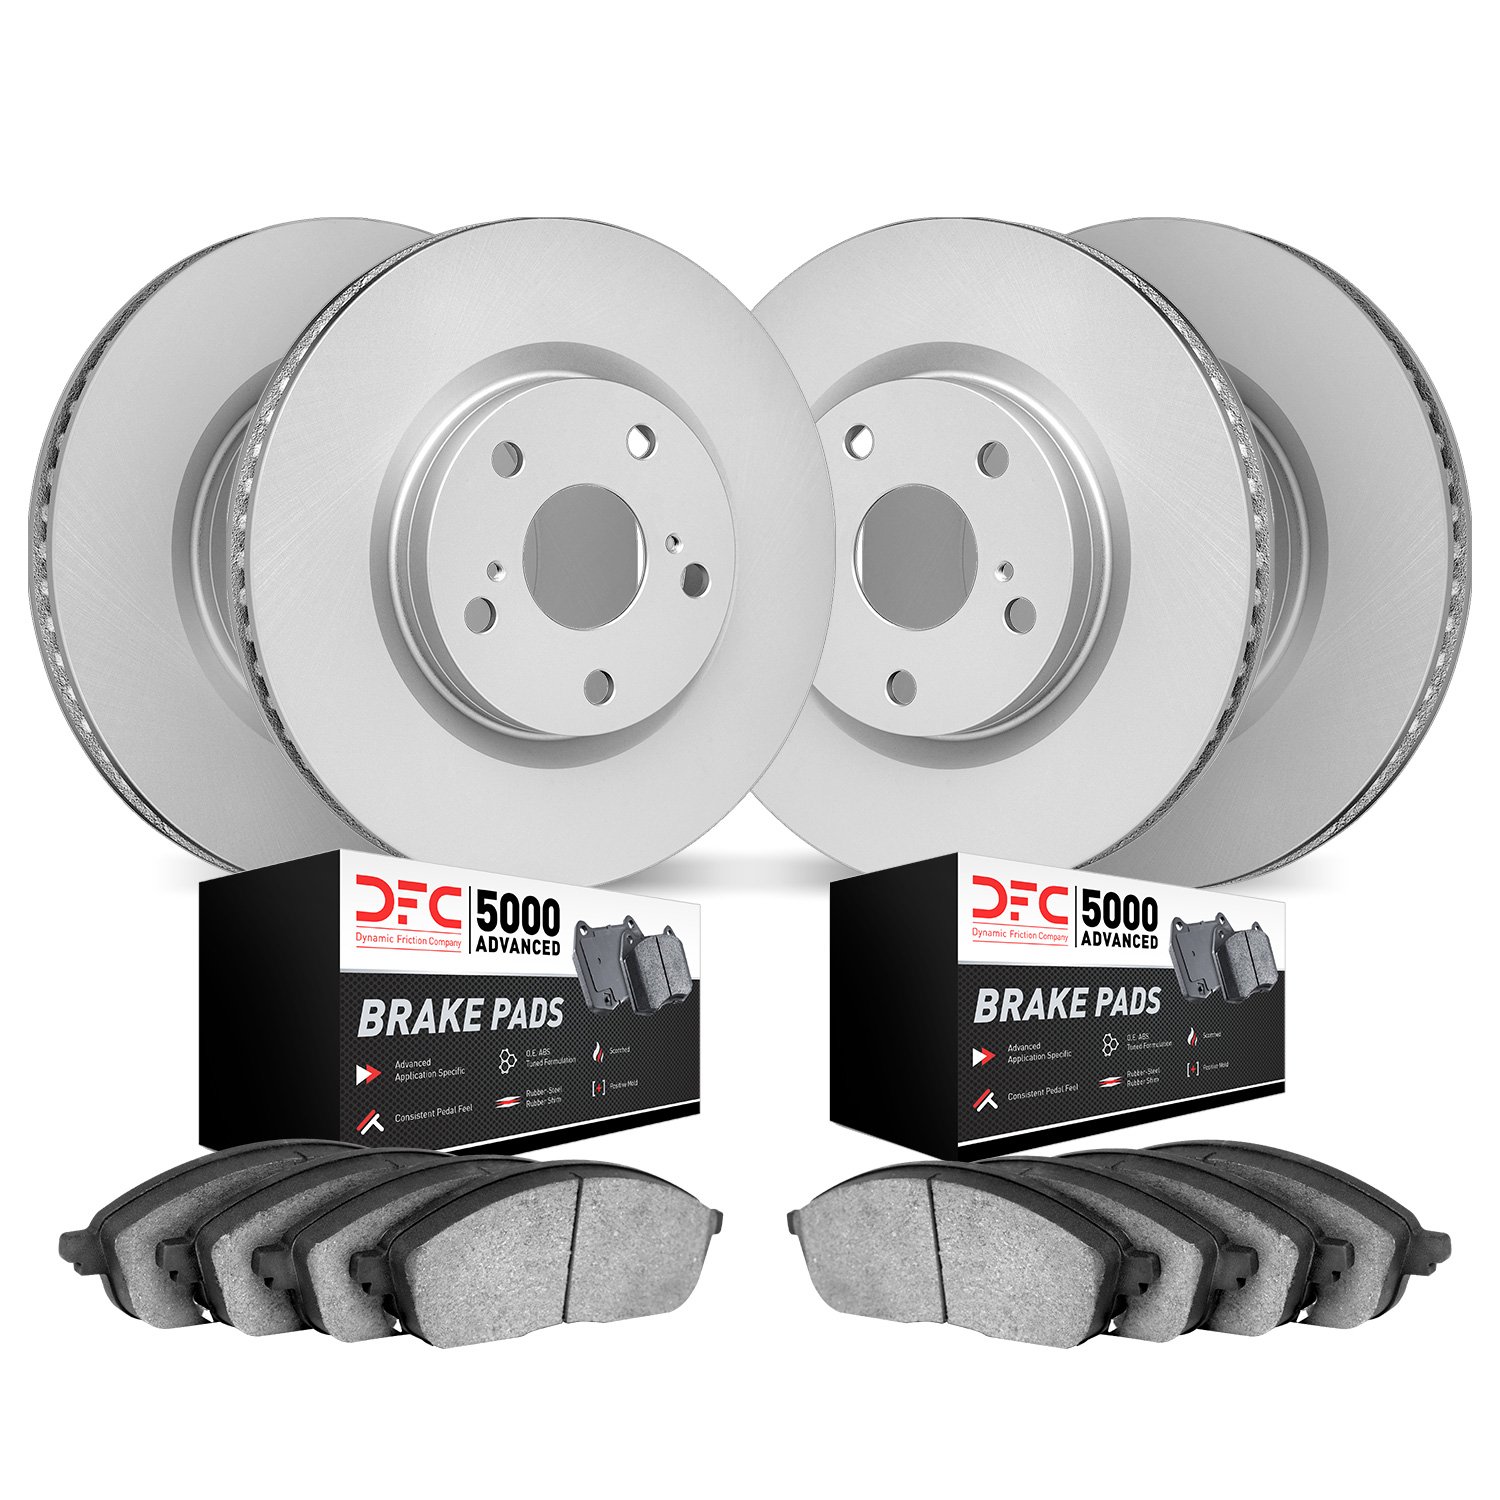 4504-55009 Geospec Brake Rotors w/5000 Advanced Brake Pads Kit, Fits Select Ford/Lincoln/Mercury/Mazda, Position: Front and Rear